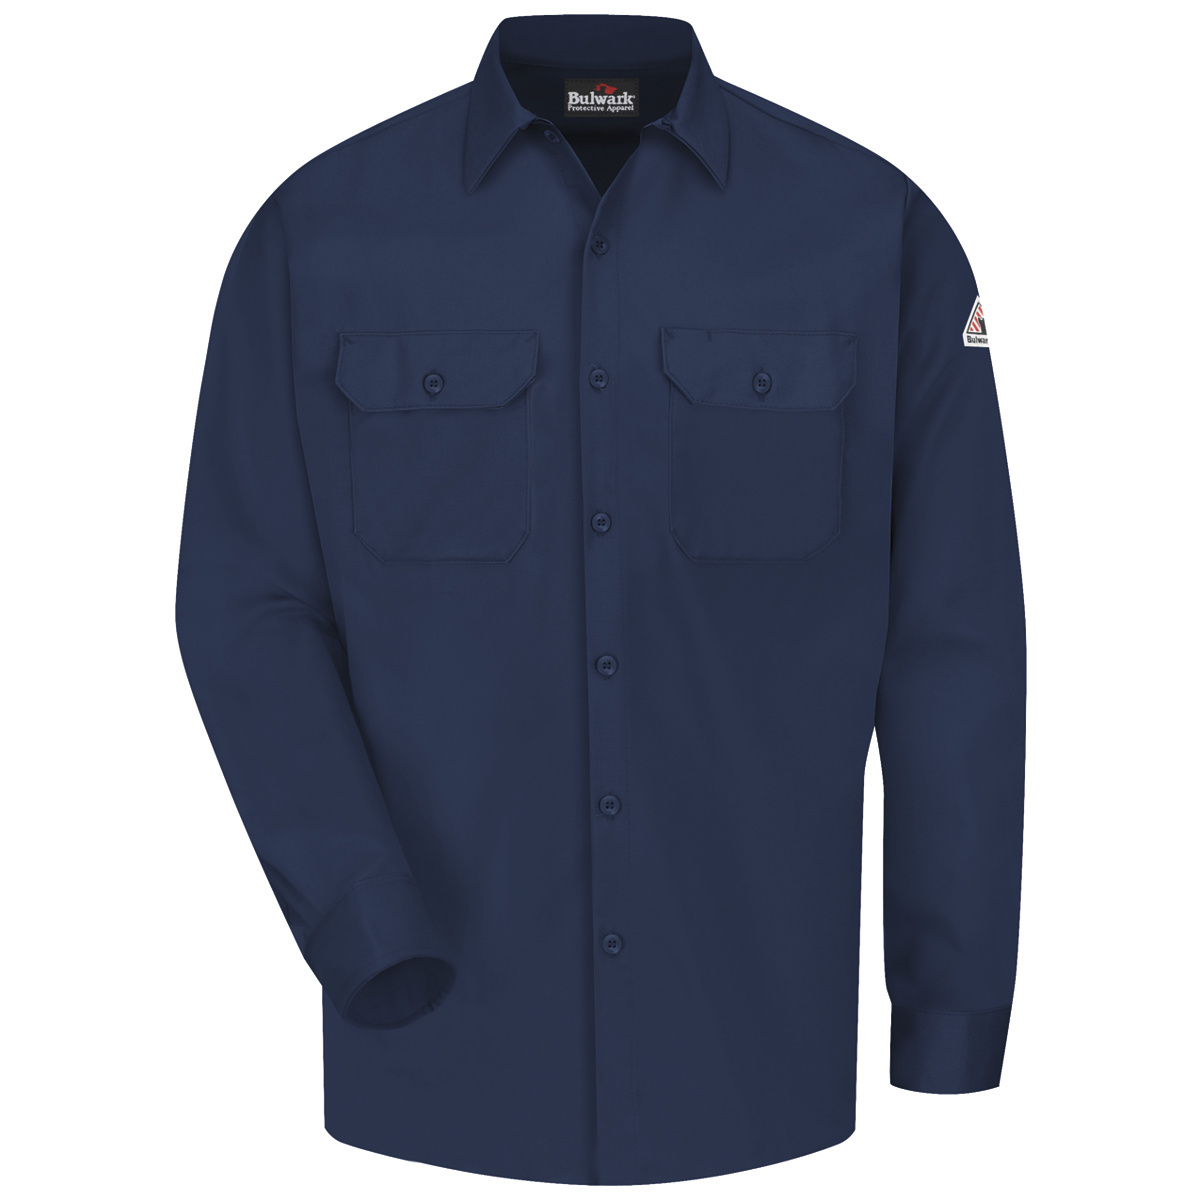 Bulwark® X-Large Tall Navy Blue Westex Ultrasoft®/Cotton/Nylon Flame Resistant Work Shirt With Button Front Closure